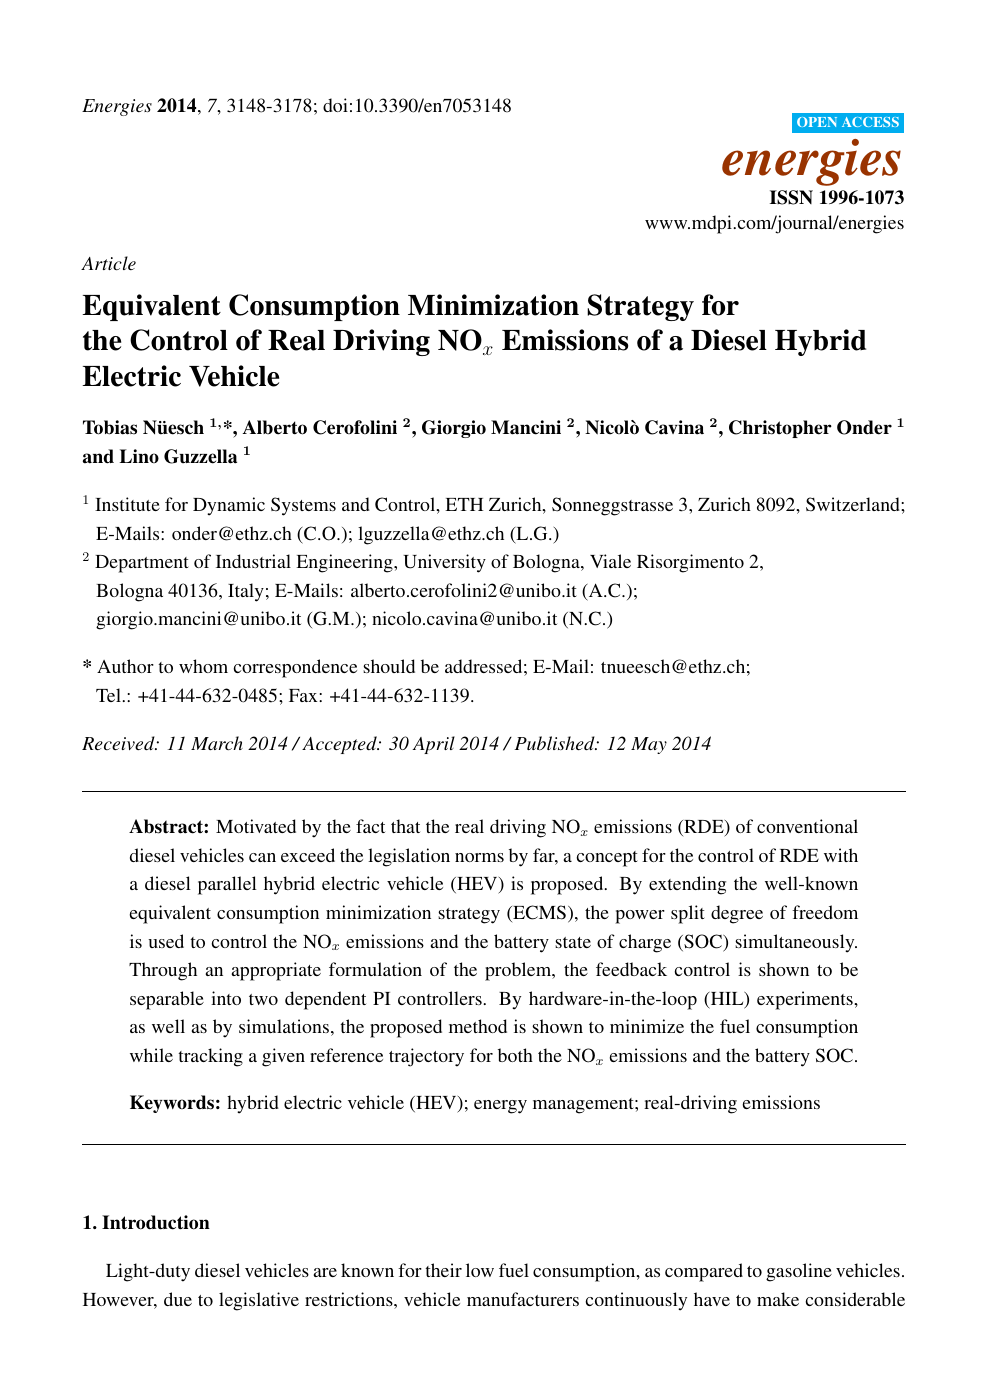 Equivalent Consumption Minimization Strategy For The Control Of Real Driving Nox Emissions Of A Diesel Hybrid Electric Vehicle Topic Of Research Paper In Electrical Engineering Electronic Engineering Information Engineering Download Scholarly